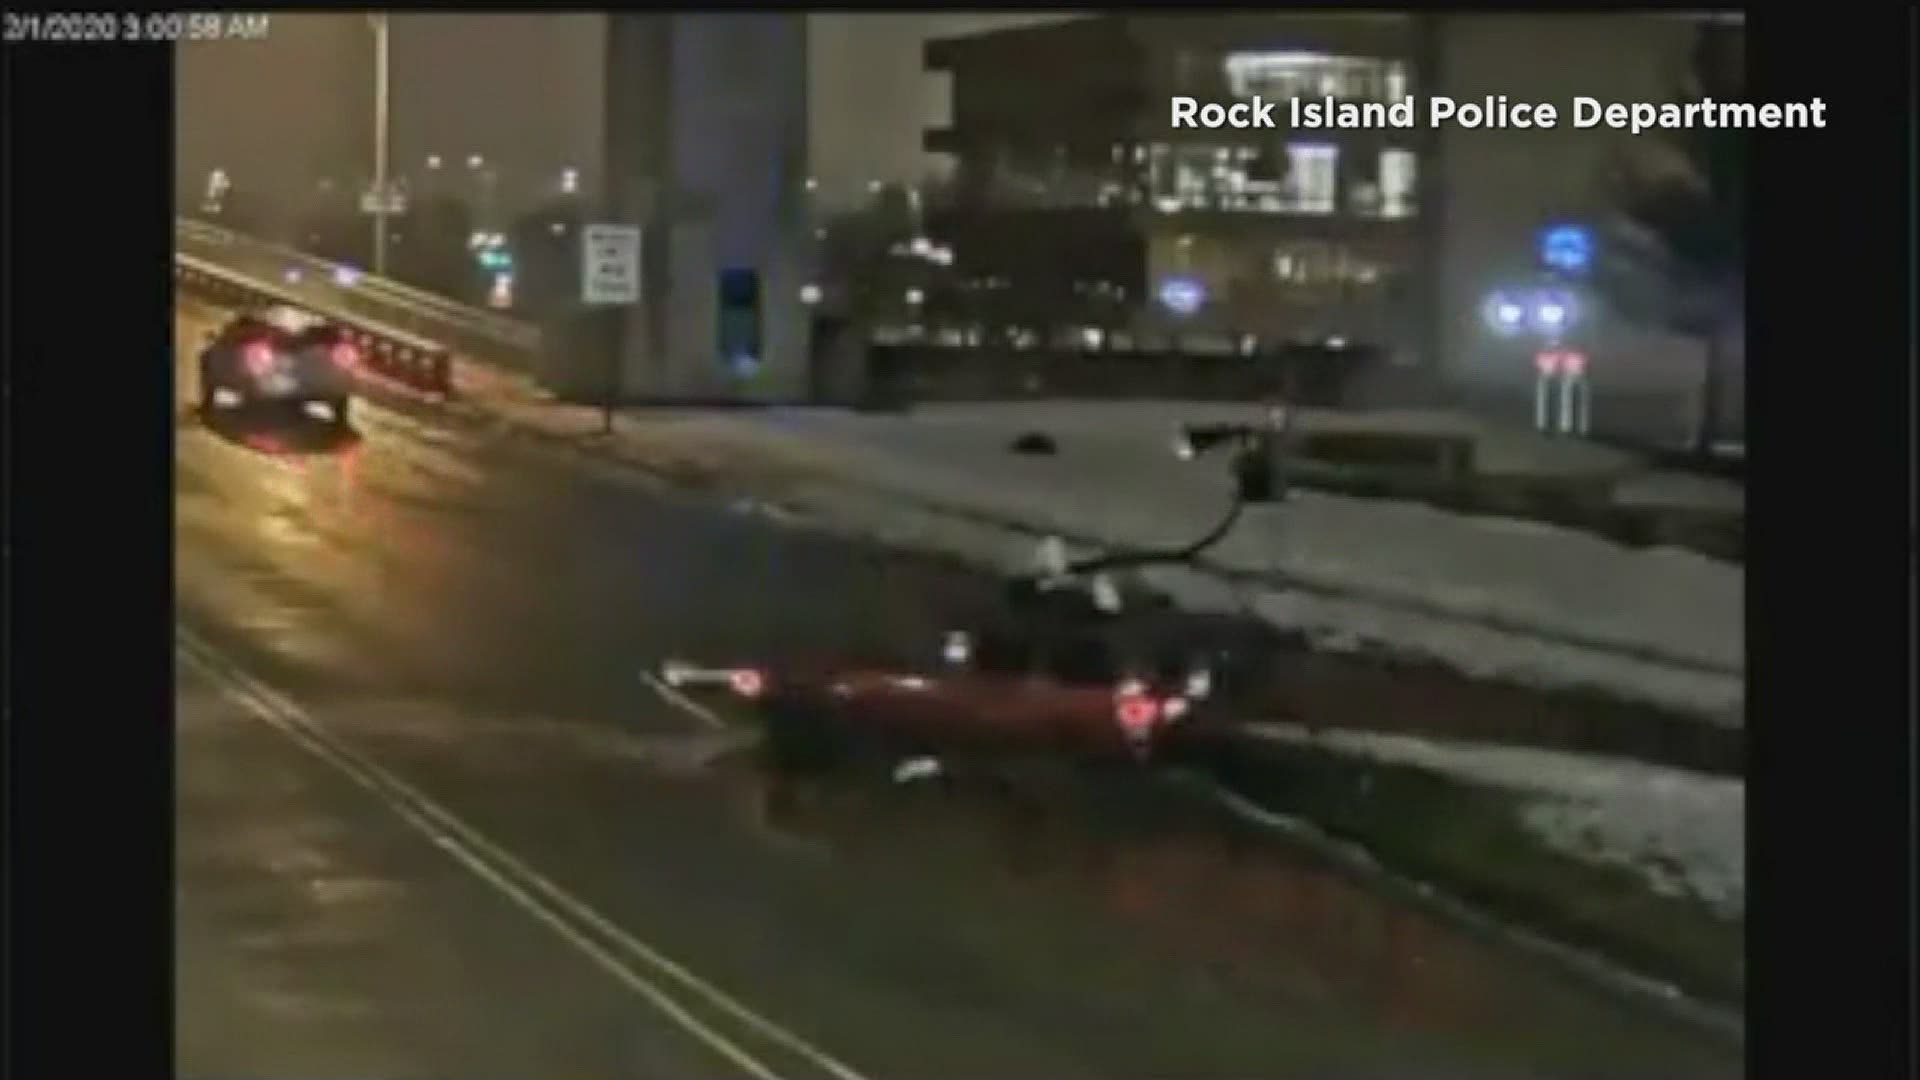 The driver of a Jeep that plowed through a street lamp and took off into Davenport without stopping has been identified by Rock Island police.